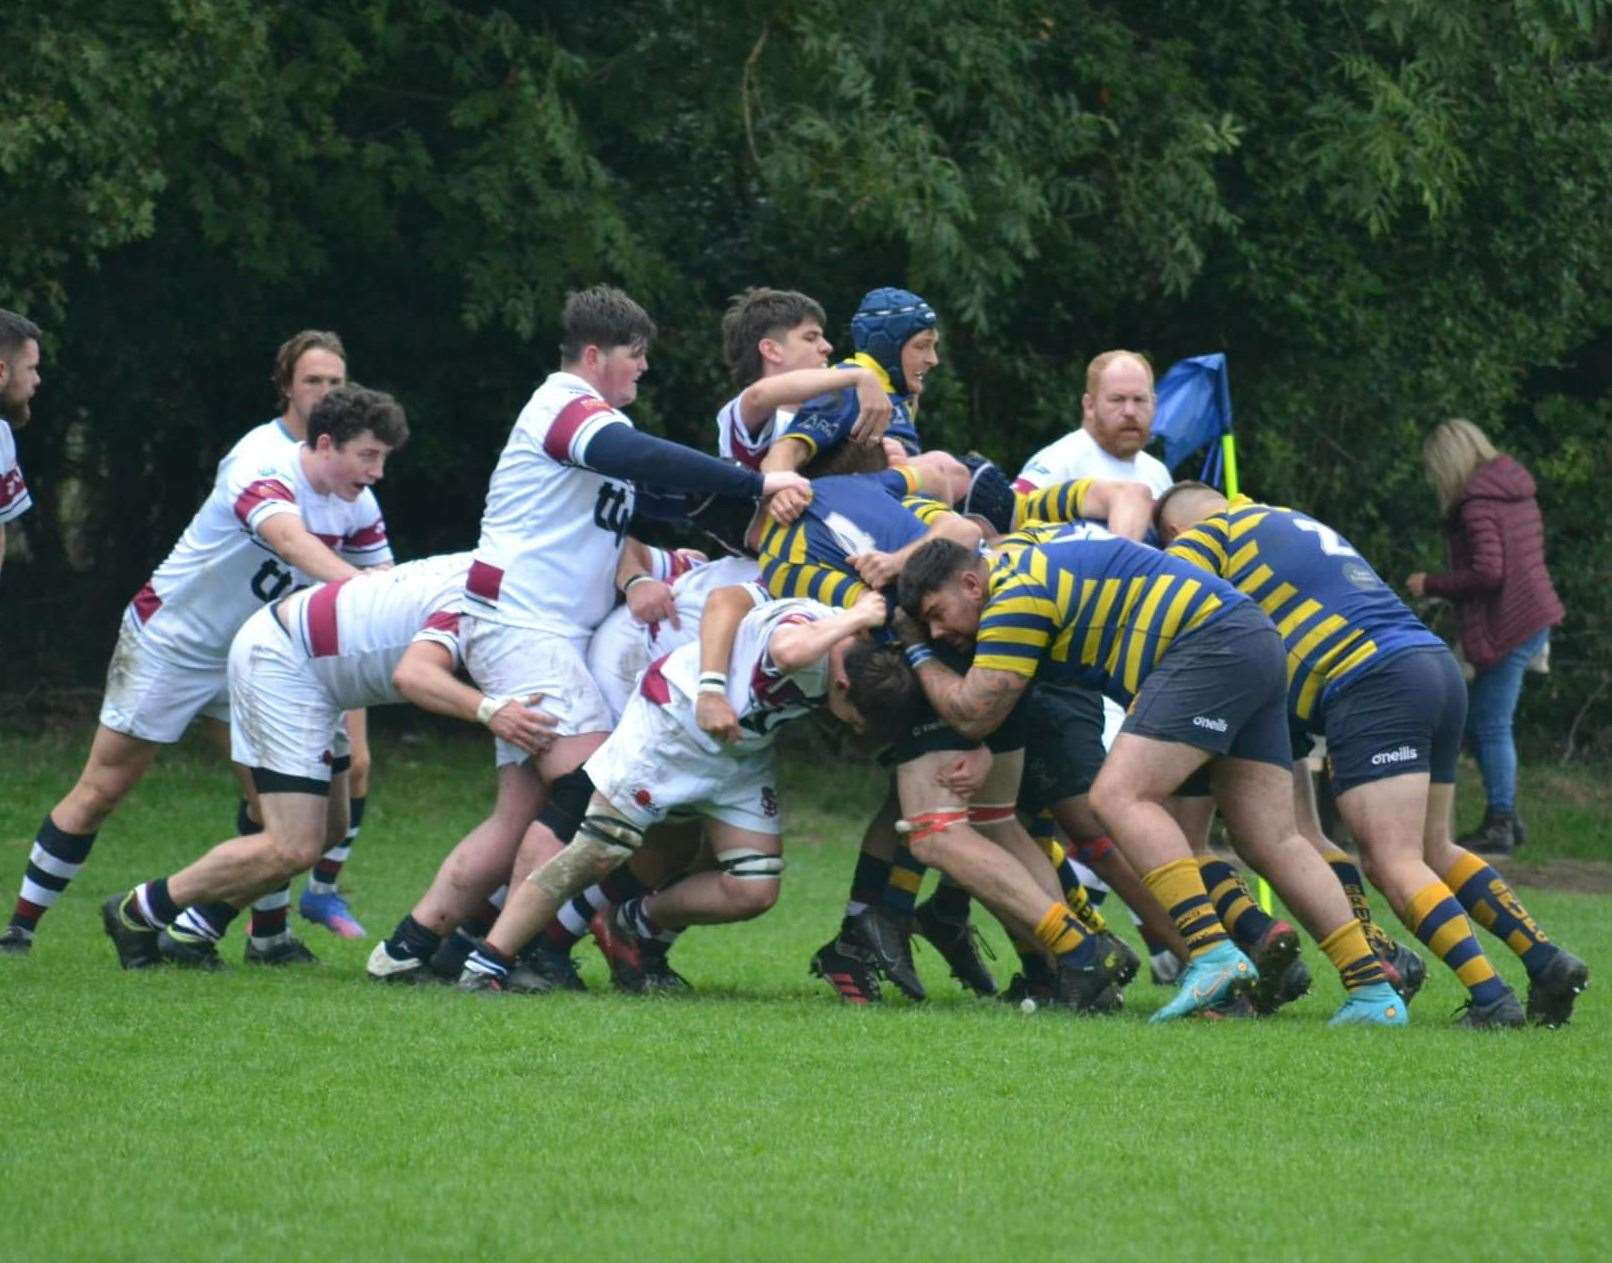 Action from Sittingbourne's big win over Sidcup 3rds